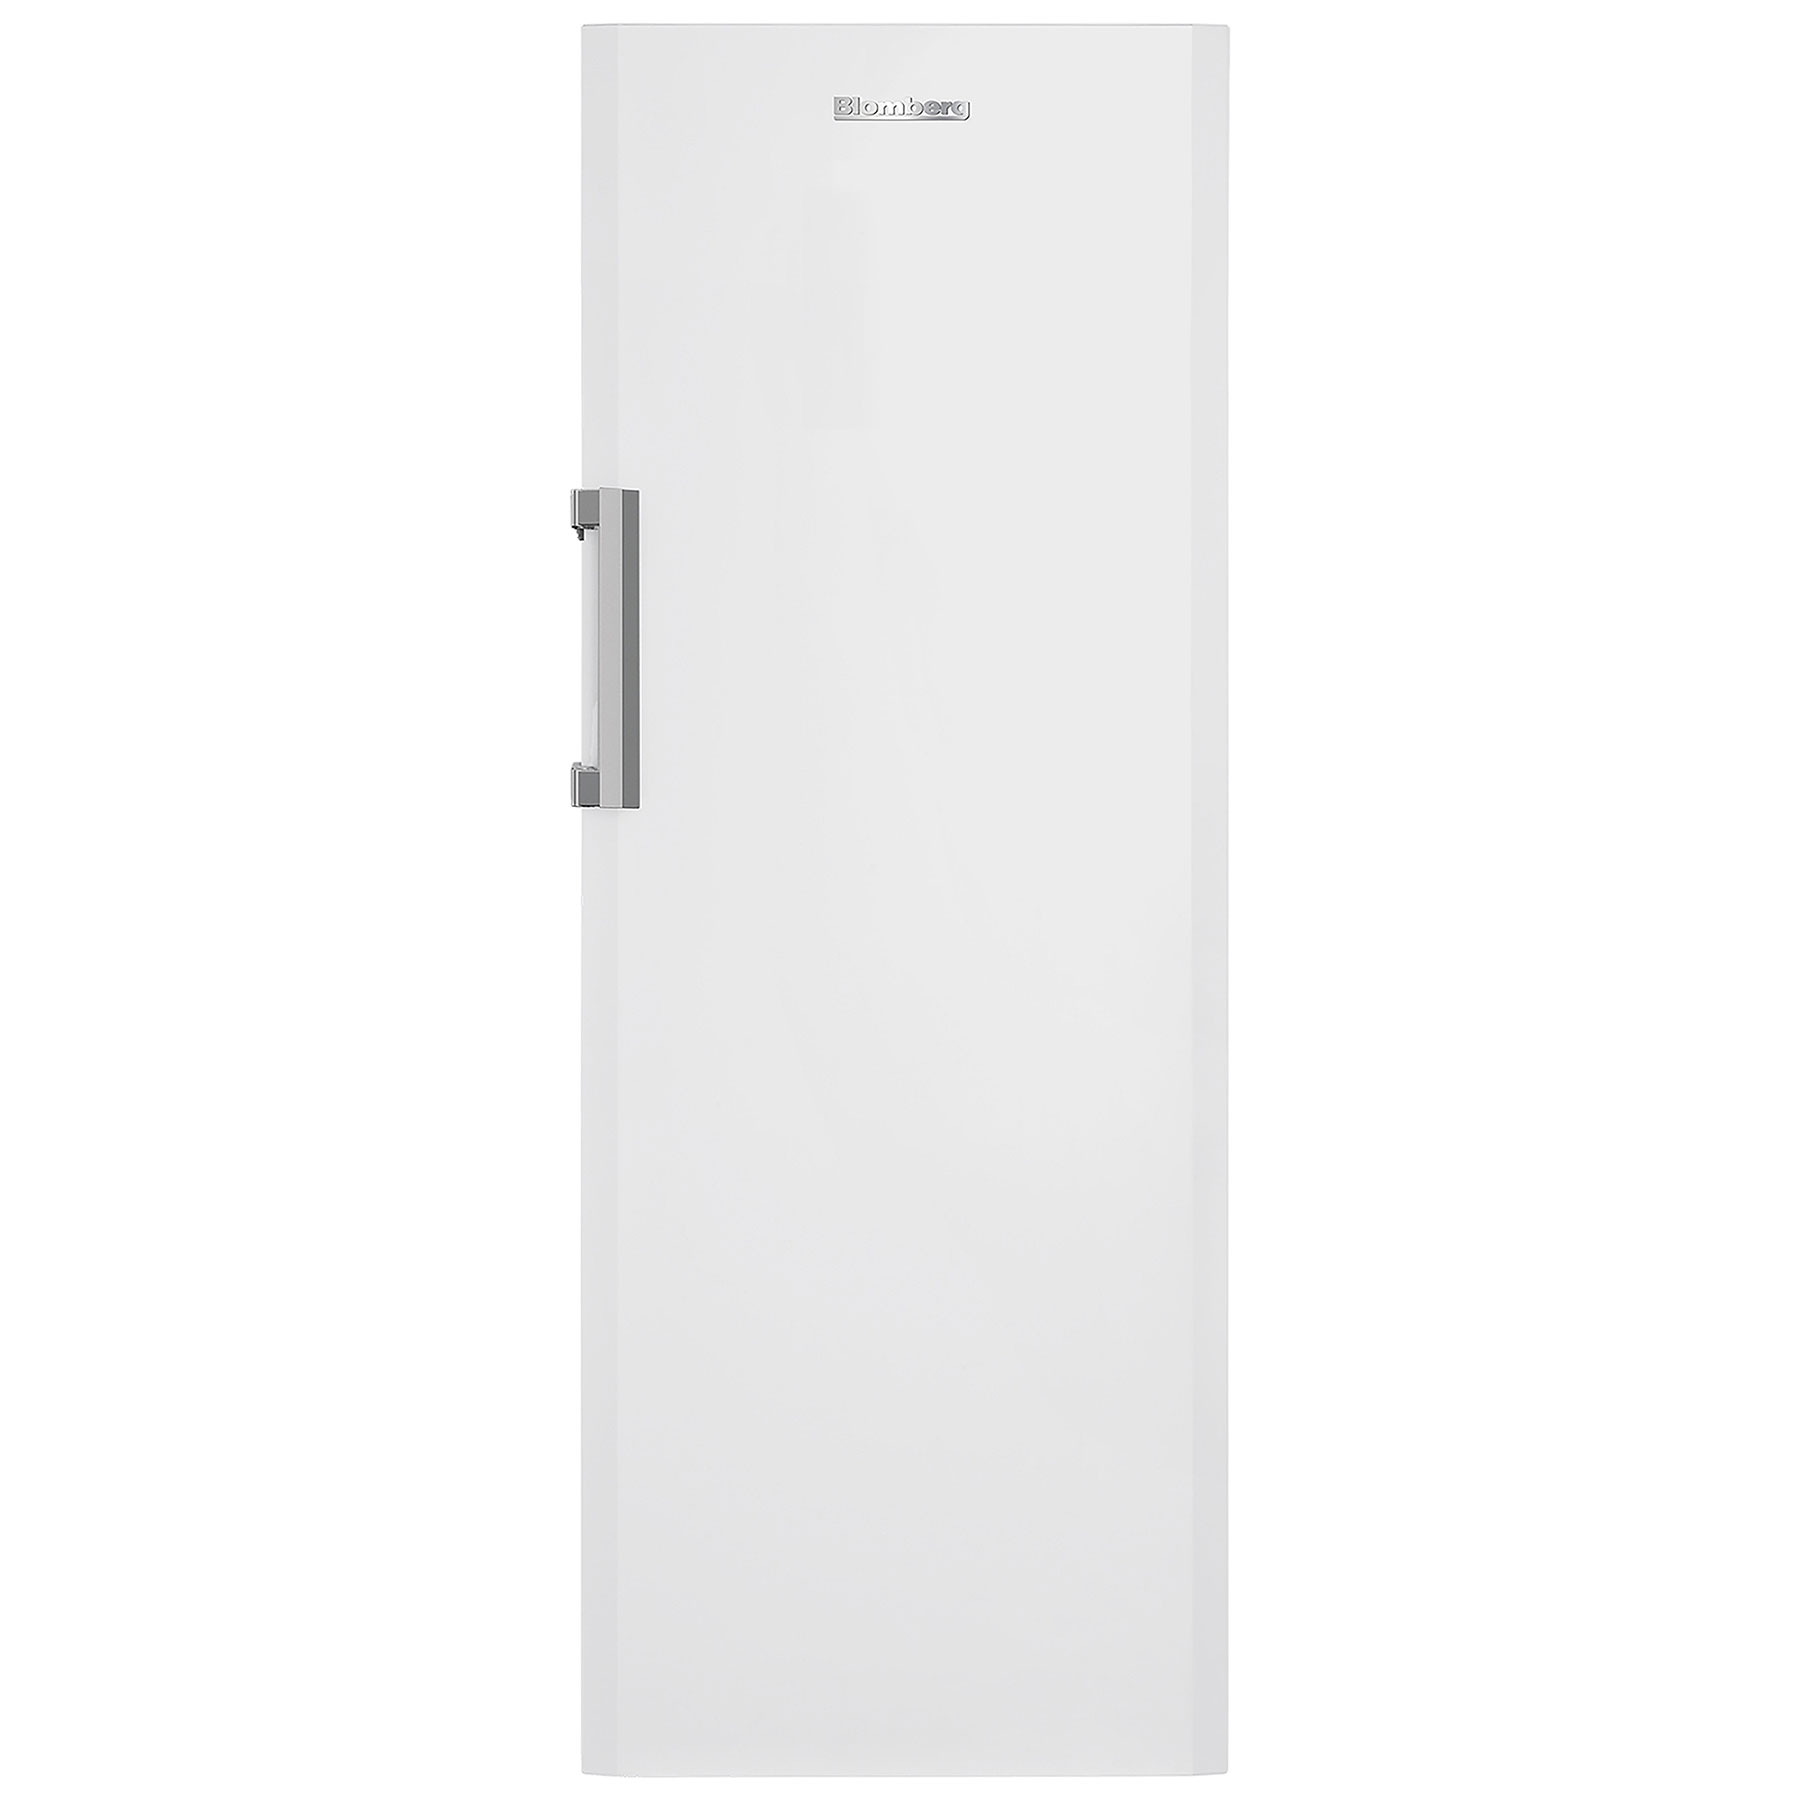 Image of Blomberg FNM4671P 60cm Tall Frost Free Freezer White 1 71m E Rated 256